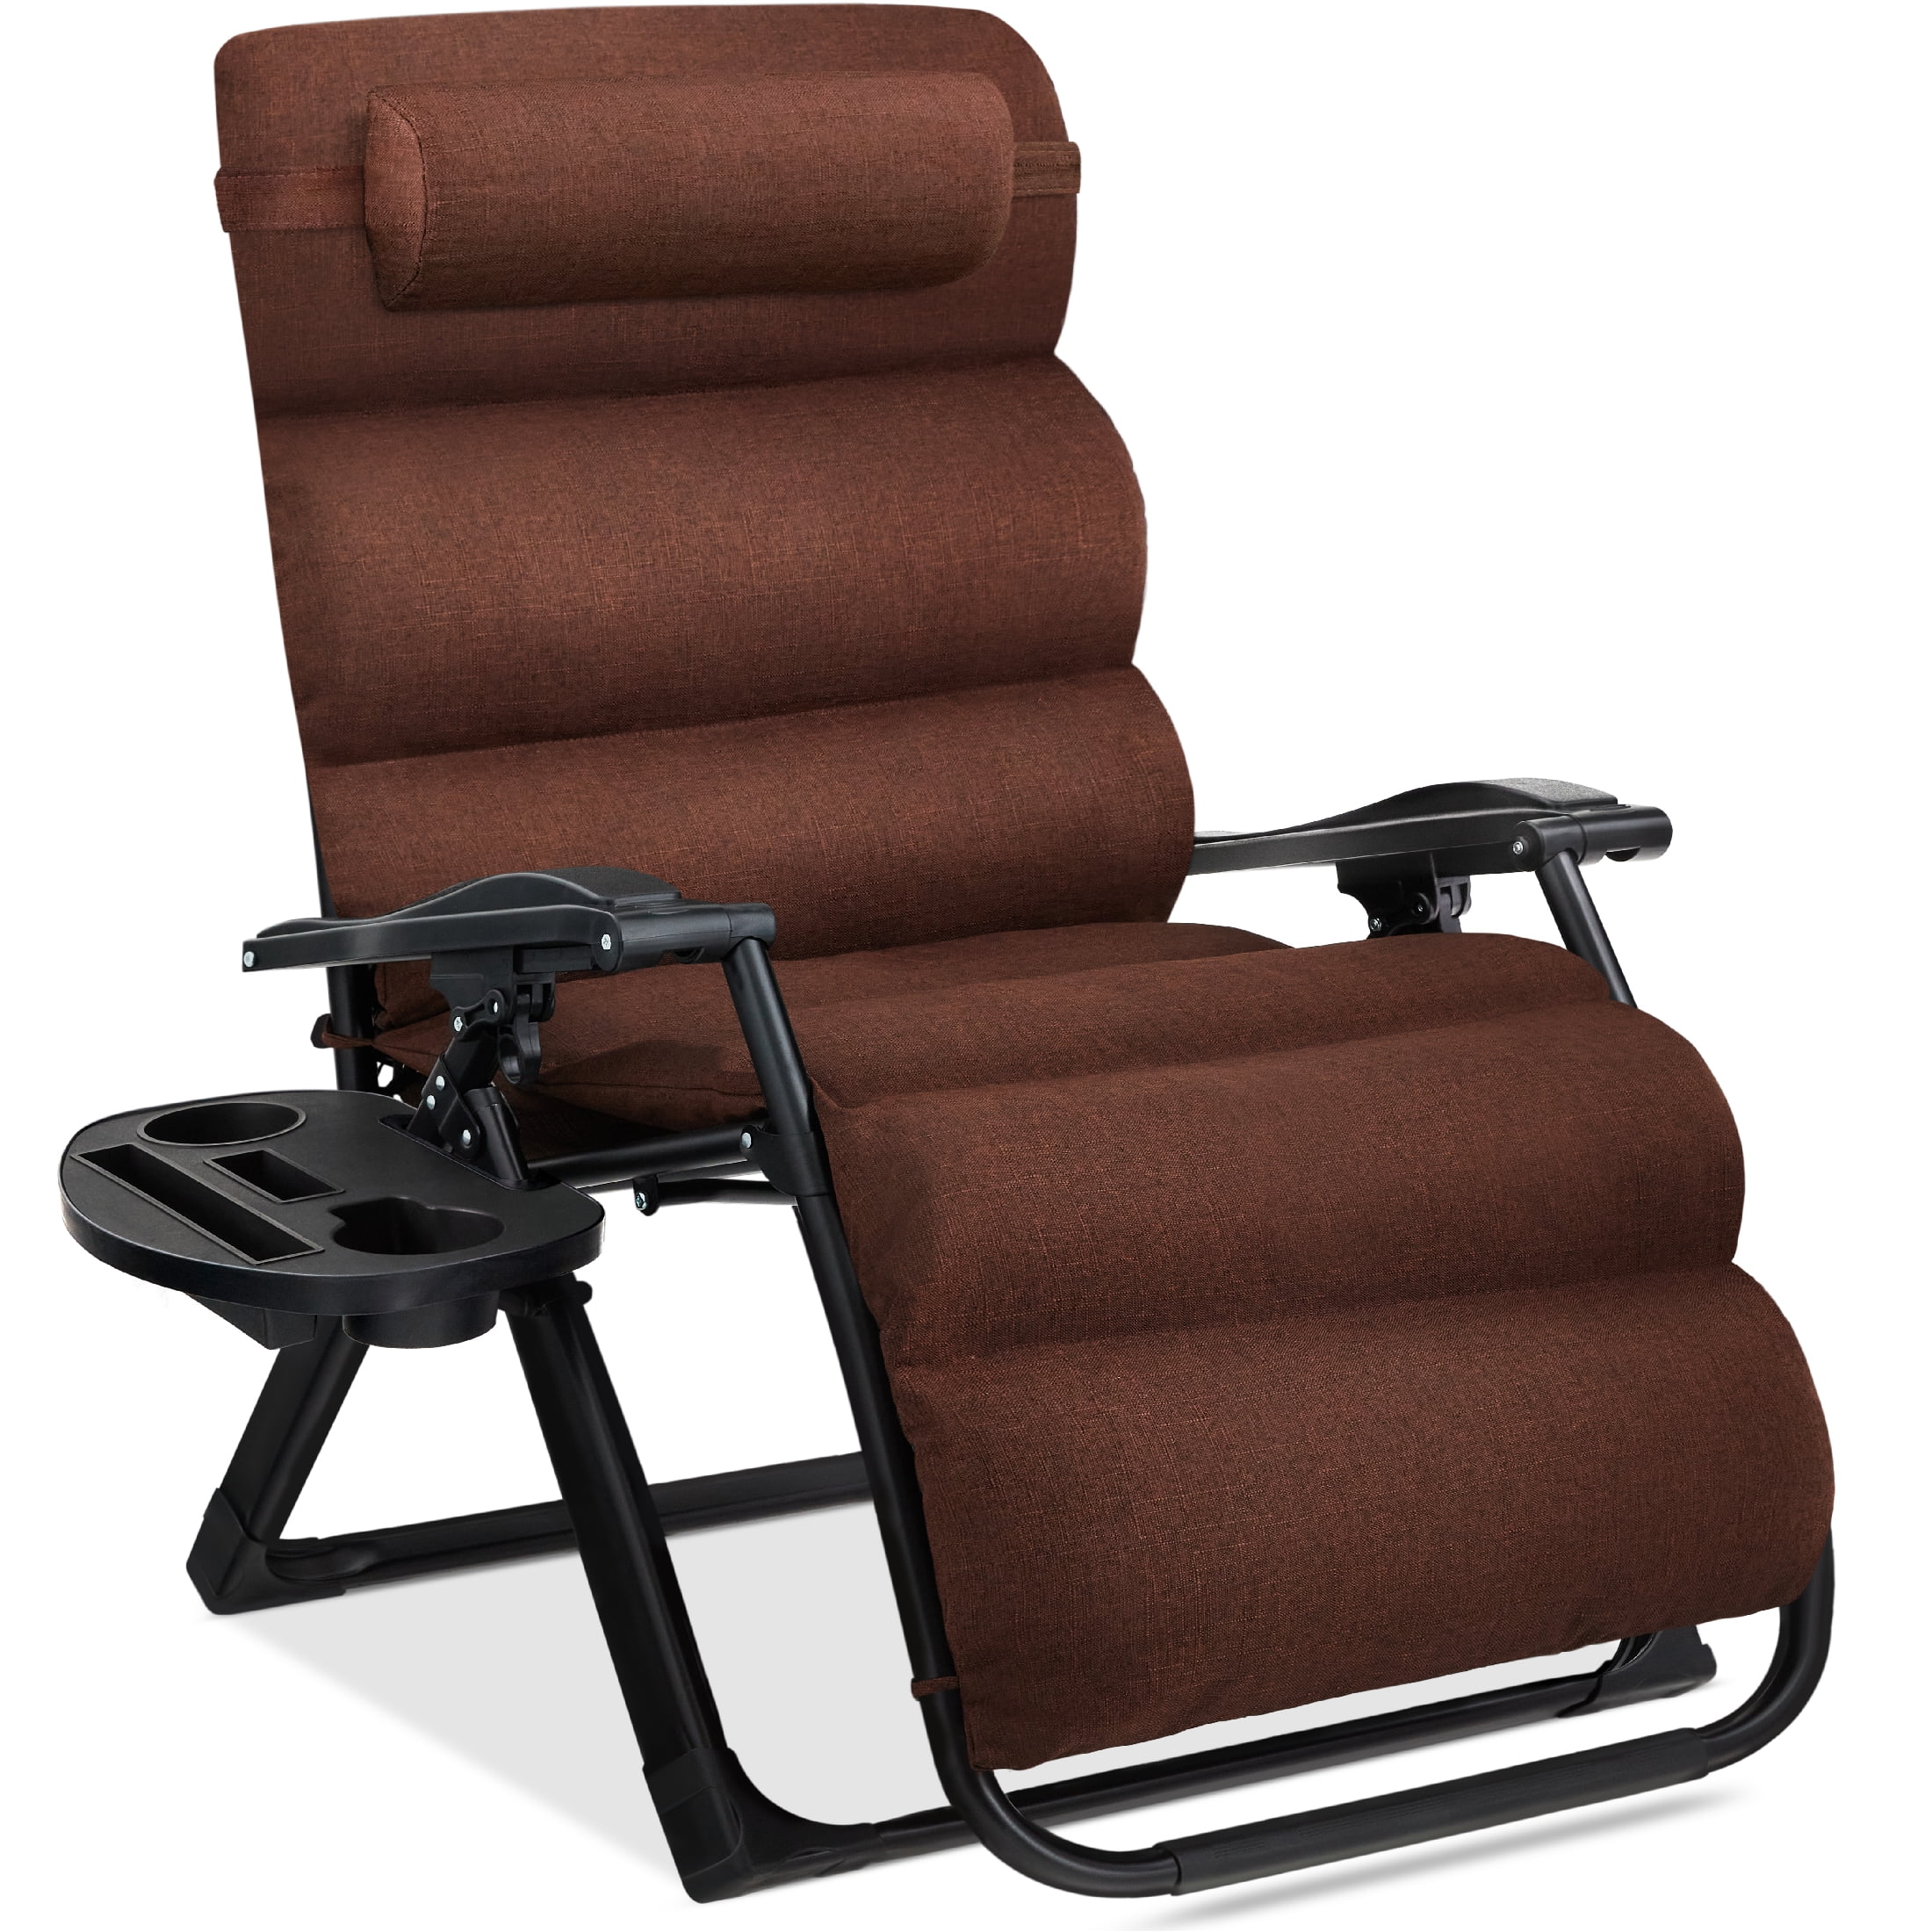 The Ultimate Recliner: Choosing the Best for Relaxation缩略图